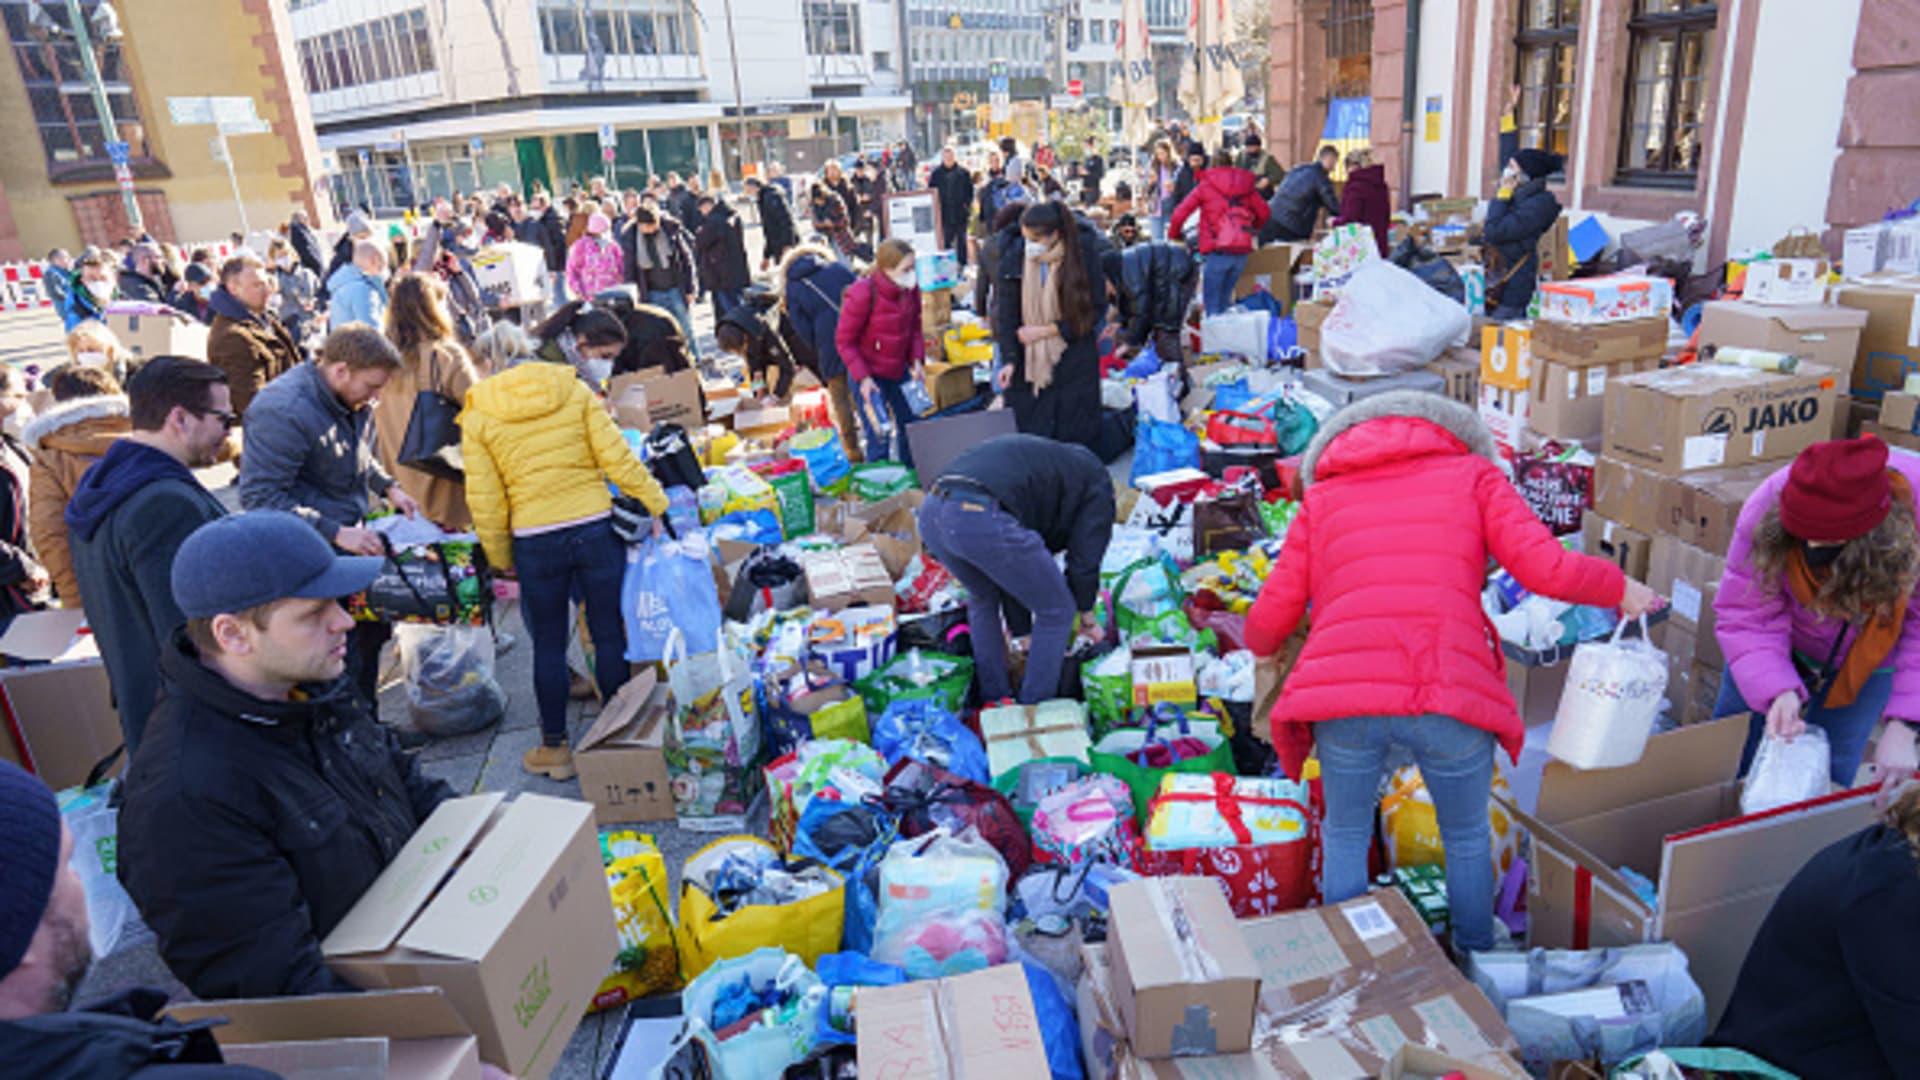 Donations in kind for Ukraine arrive in large quantities at an improvised collection point at the Hauptwache in downtown Frankfurt this afternoon.